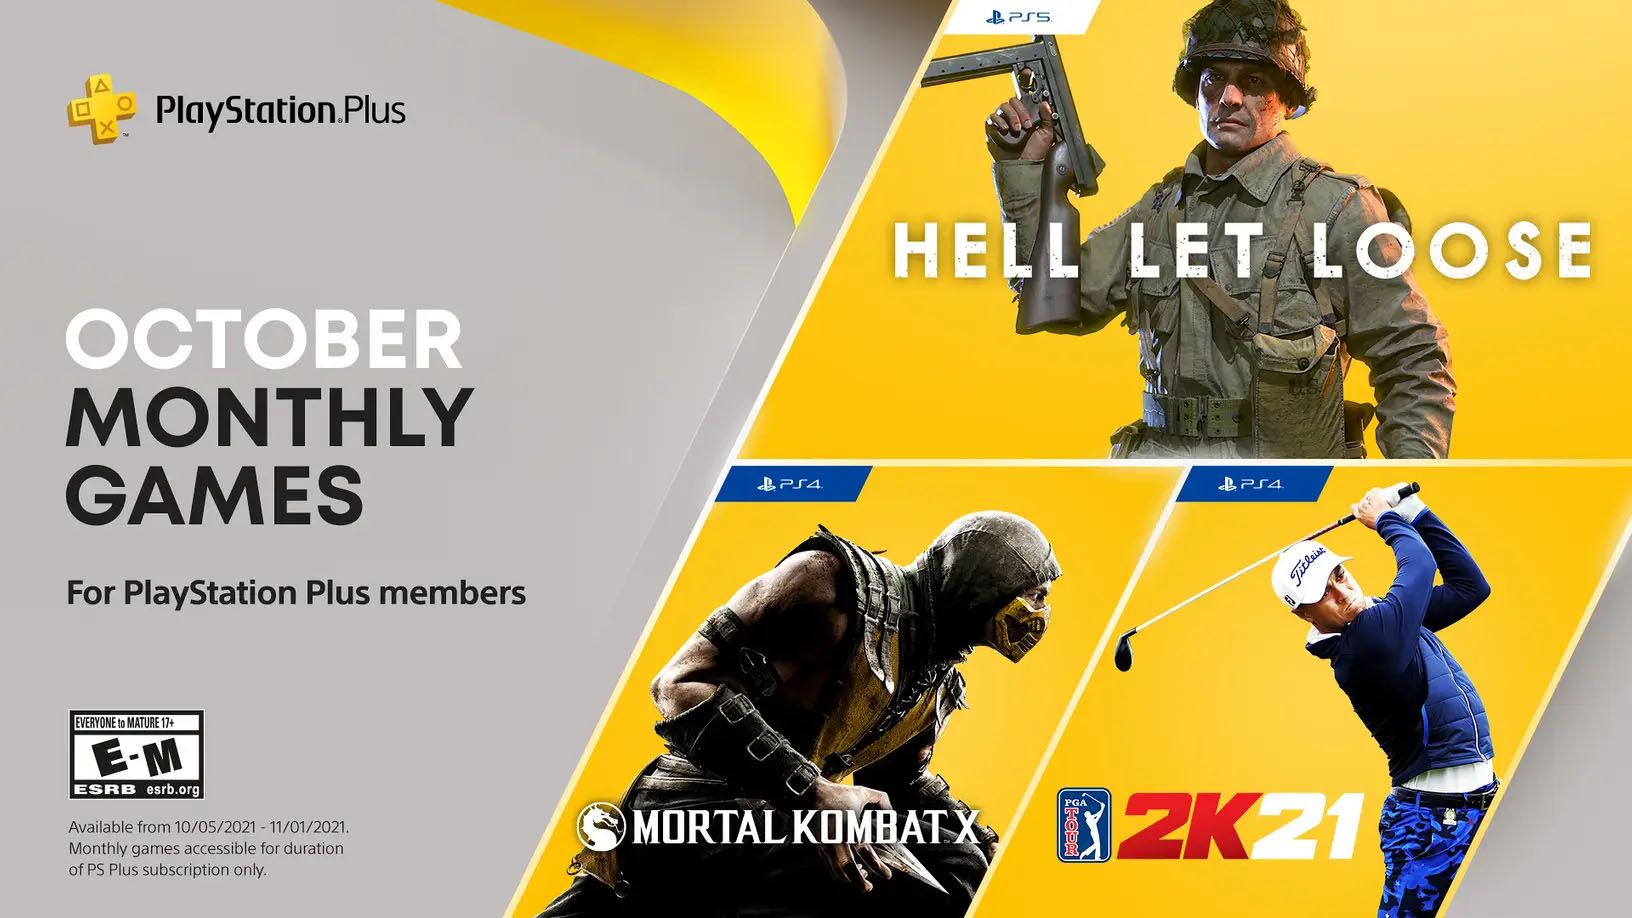 PlayStation Plus October 2021 Games Include MKX, Hell Let Loose